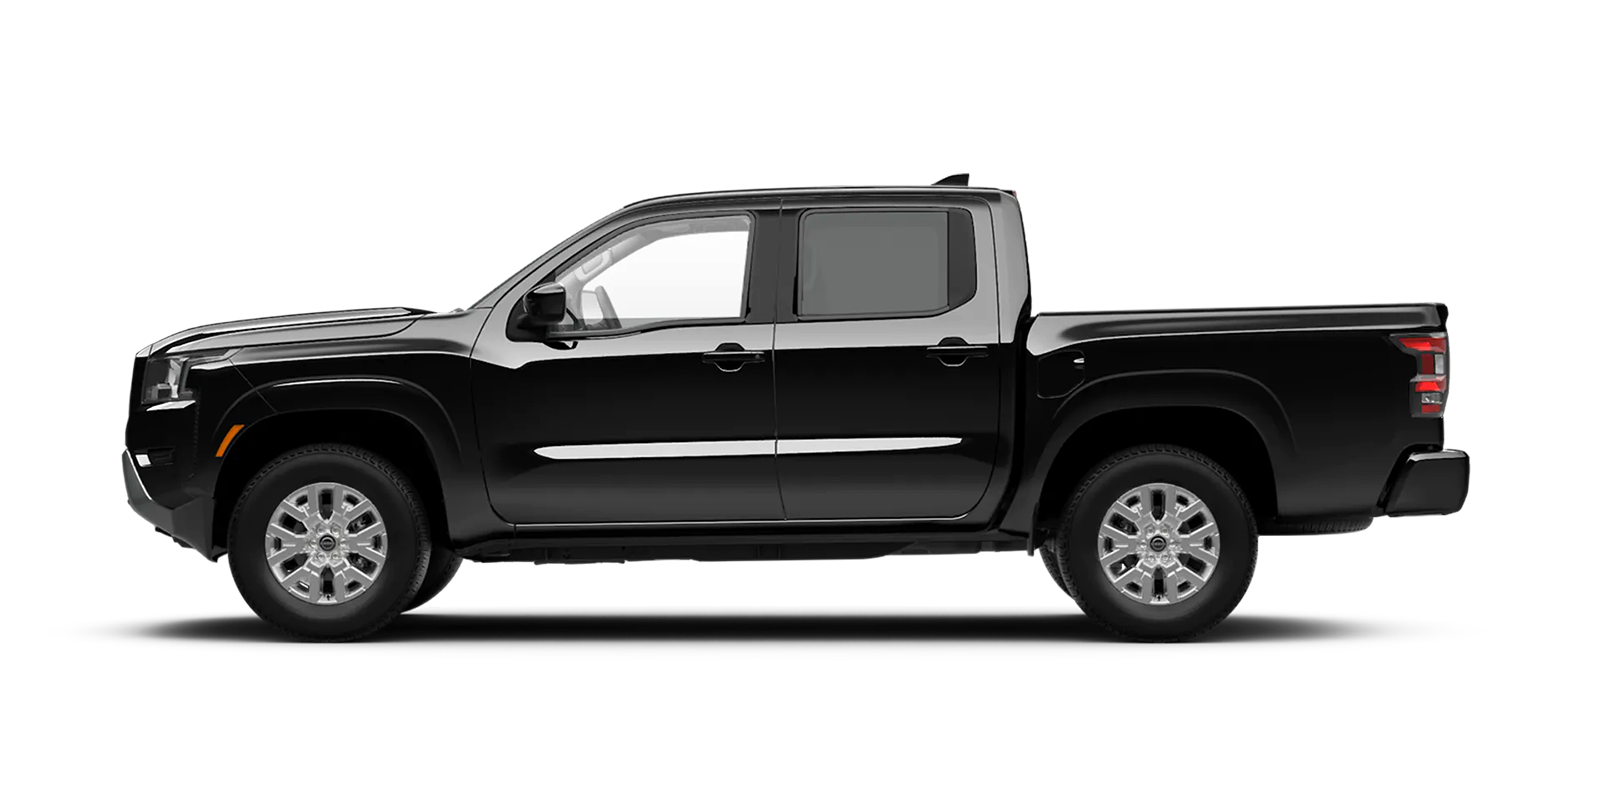 2022 Frontier Crew Cab SV 4x4 in Super Black | Greenway Nissan of Florence in Florence AL